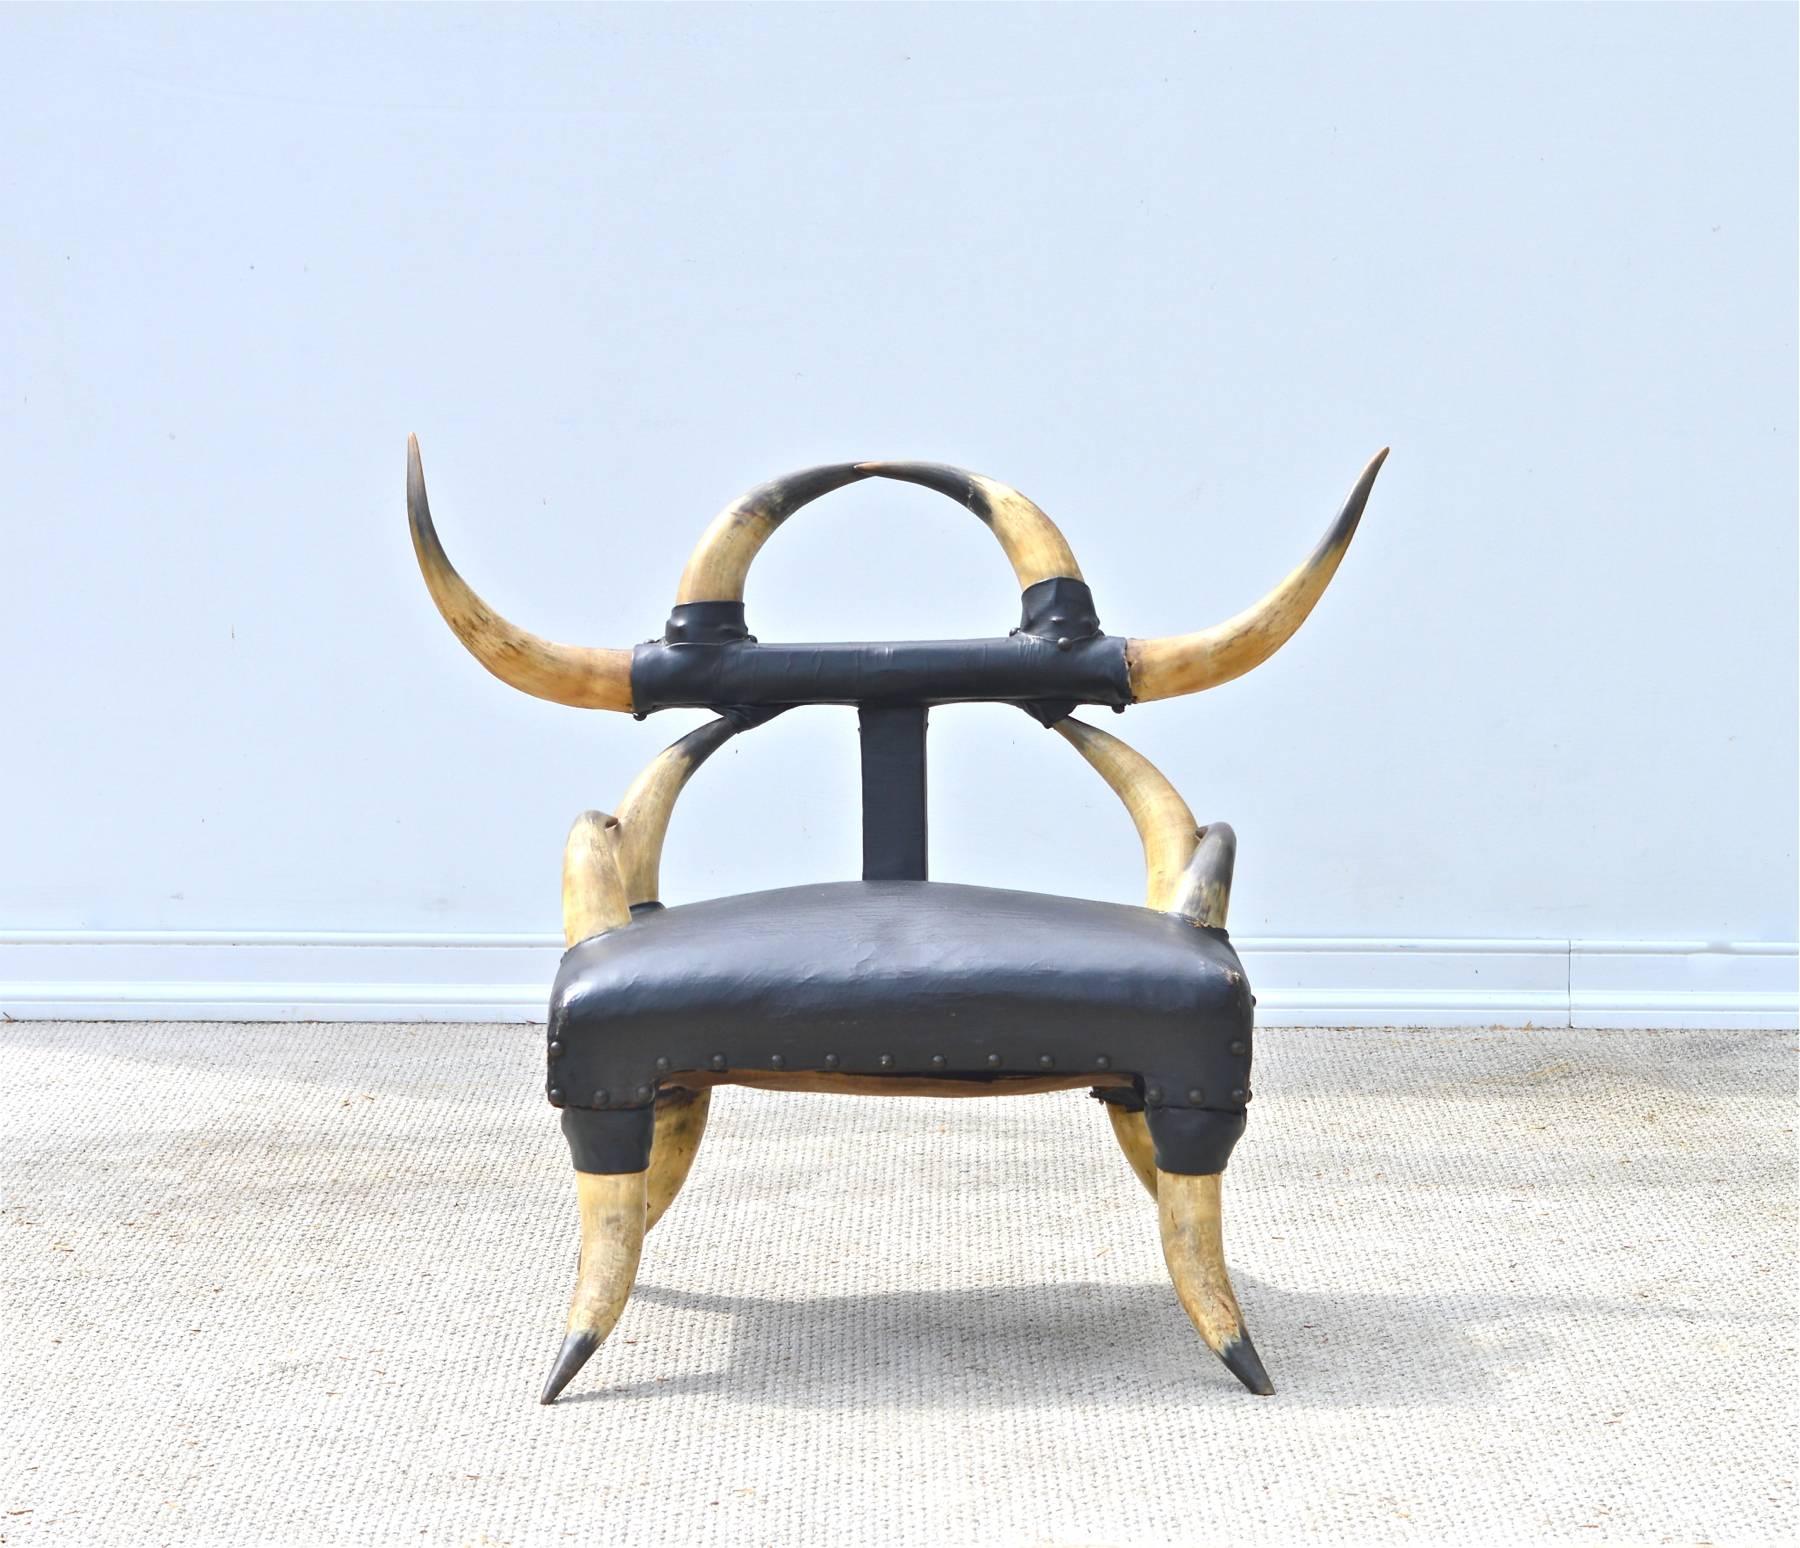 A rare and whimsical child's size steer horn chair. The late 19th century, Victorian era chair is in excellent and sturdy structural condition. Twelve steer horns adorn the frame and all have a similar color palette of cream fading nicely to gray